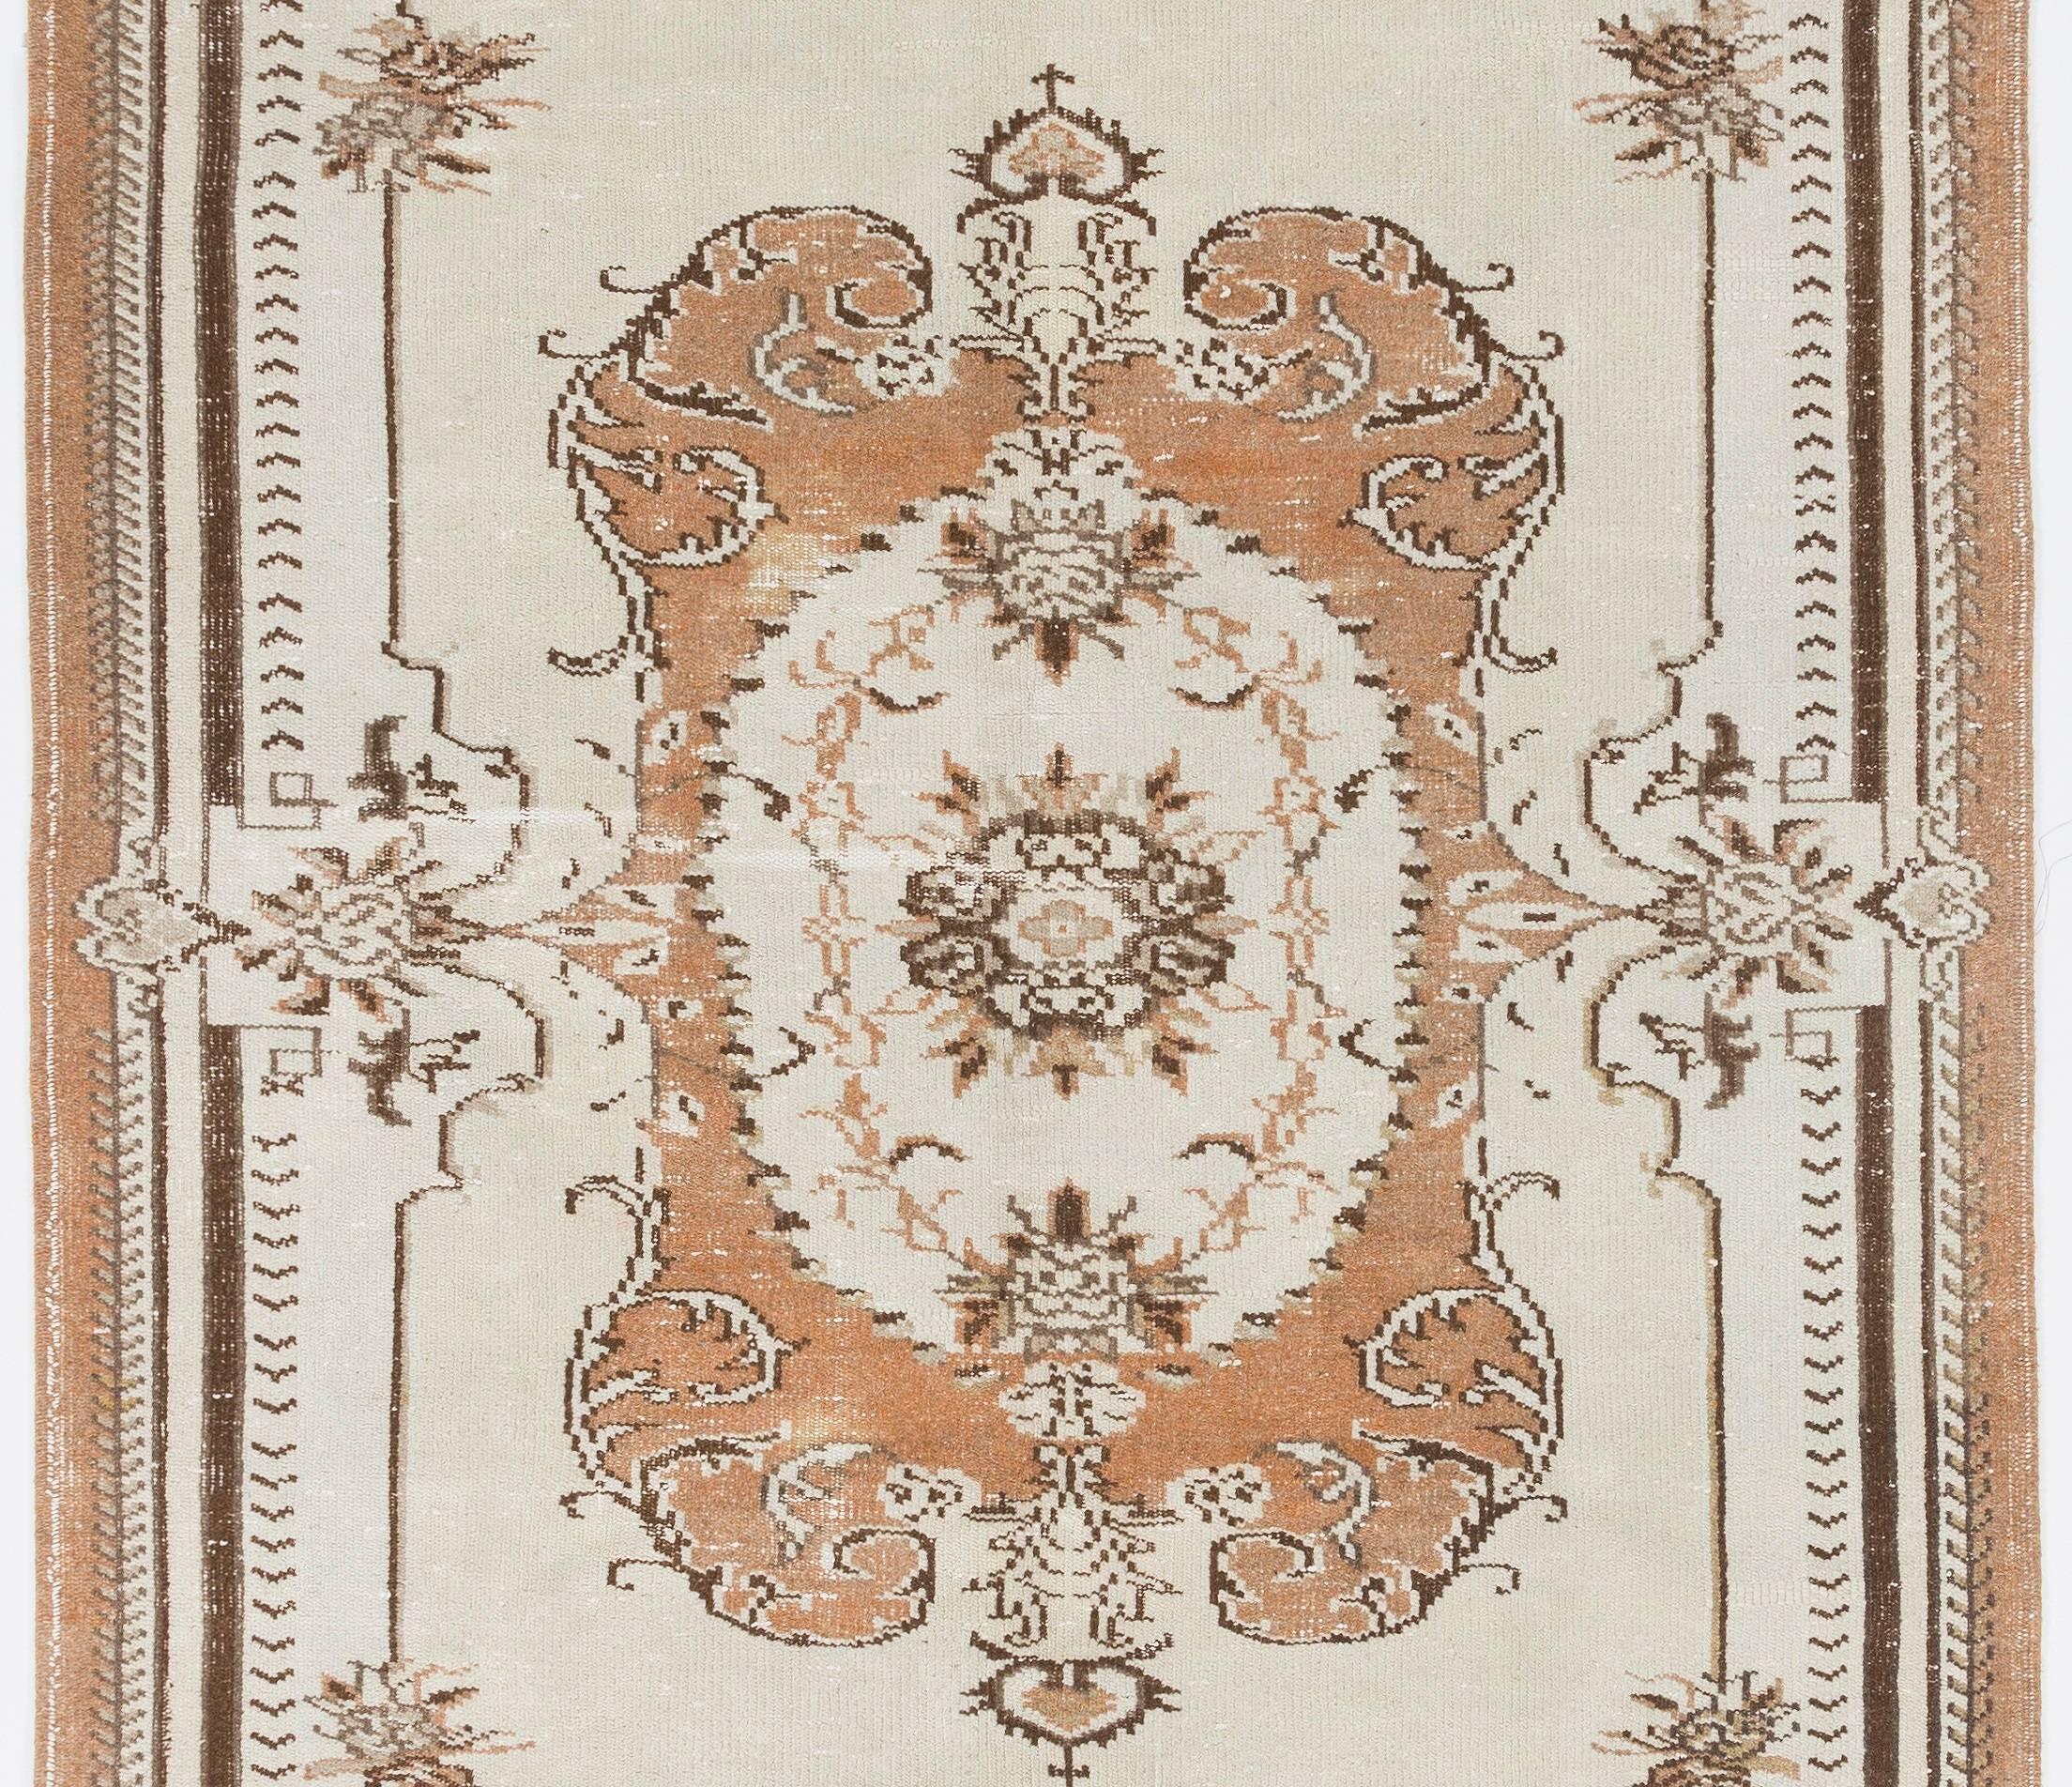 Hand-Knotted 5.6x9.6 Ft Vintage Deco Rug. Beige, Brown & Peach Colors. French Aubusson Design For Sale